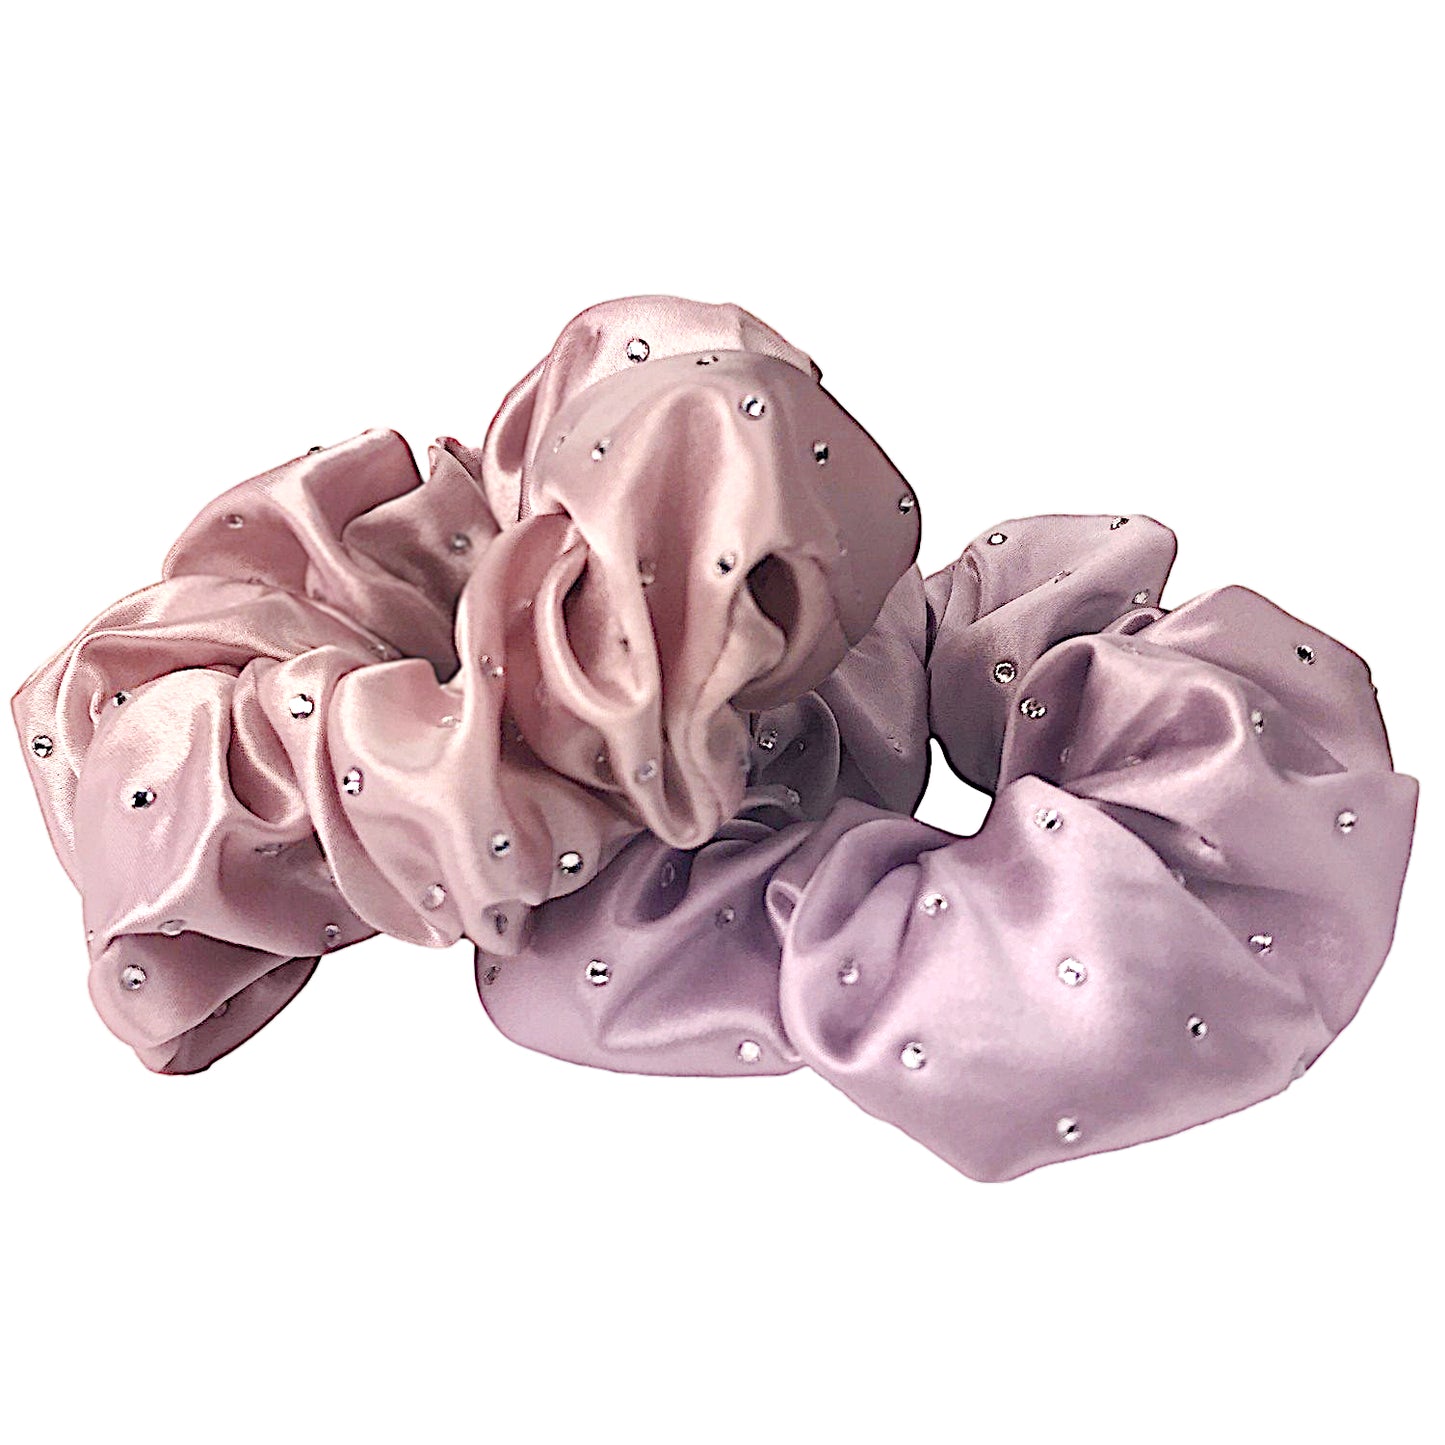 Celestial Silk scrunchies with crystals, silk hair ties with rhinestones pink and purple silk hair scrunchies stacked with white background